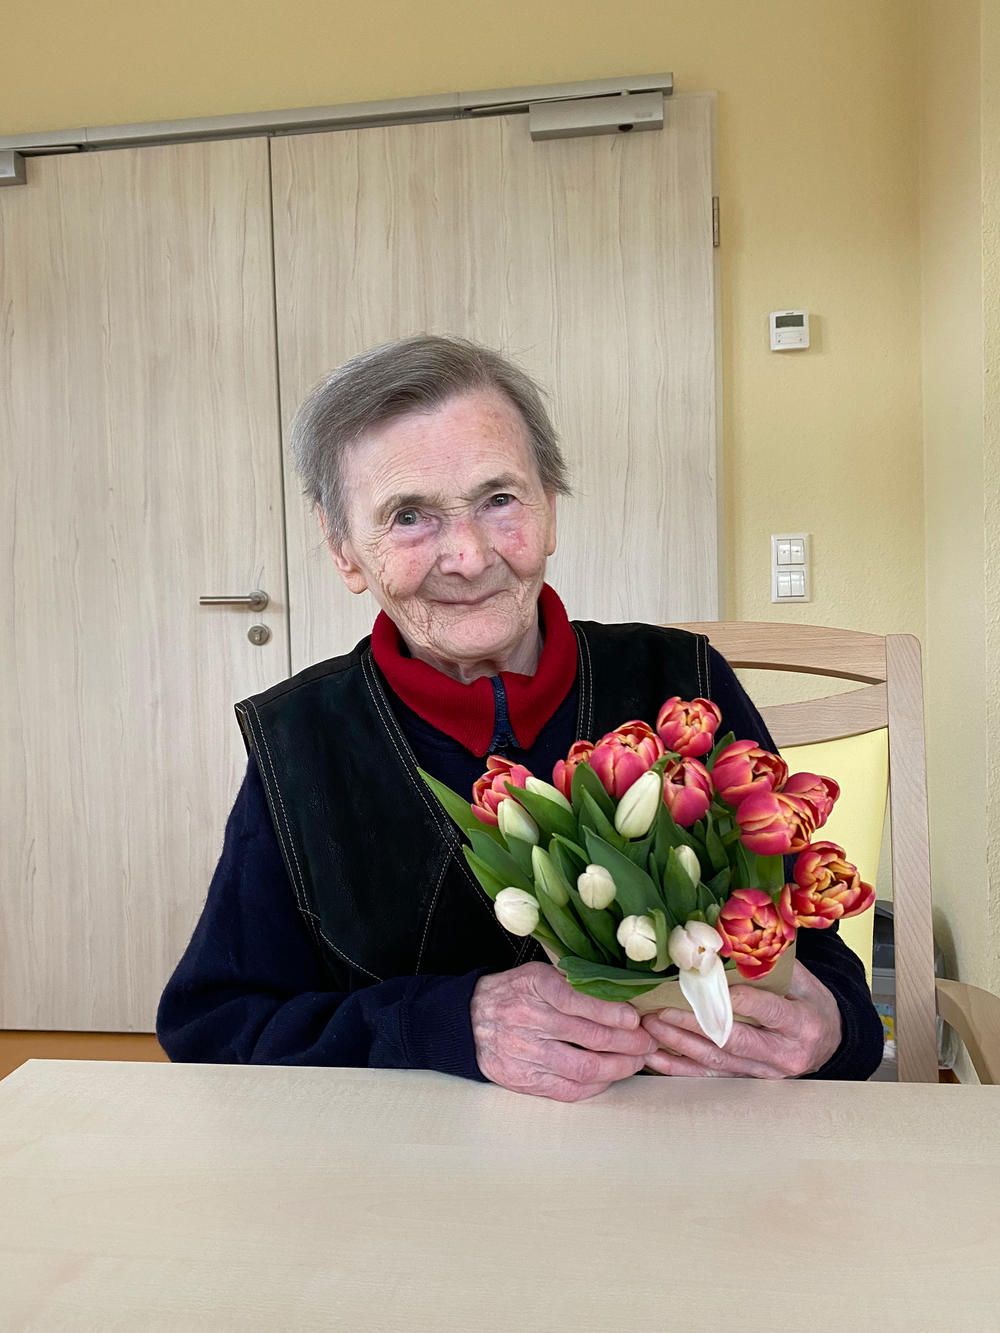 Sonya Leibovna Tartakovskaya recently celebrated her 83rd birthday, which she feels lucky to be marking. She is a retired seamstress from Irpin, near Kyiv, where Ukrainian authorities have reported evidence of atrocities committed by Russian troops against civilians.